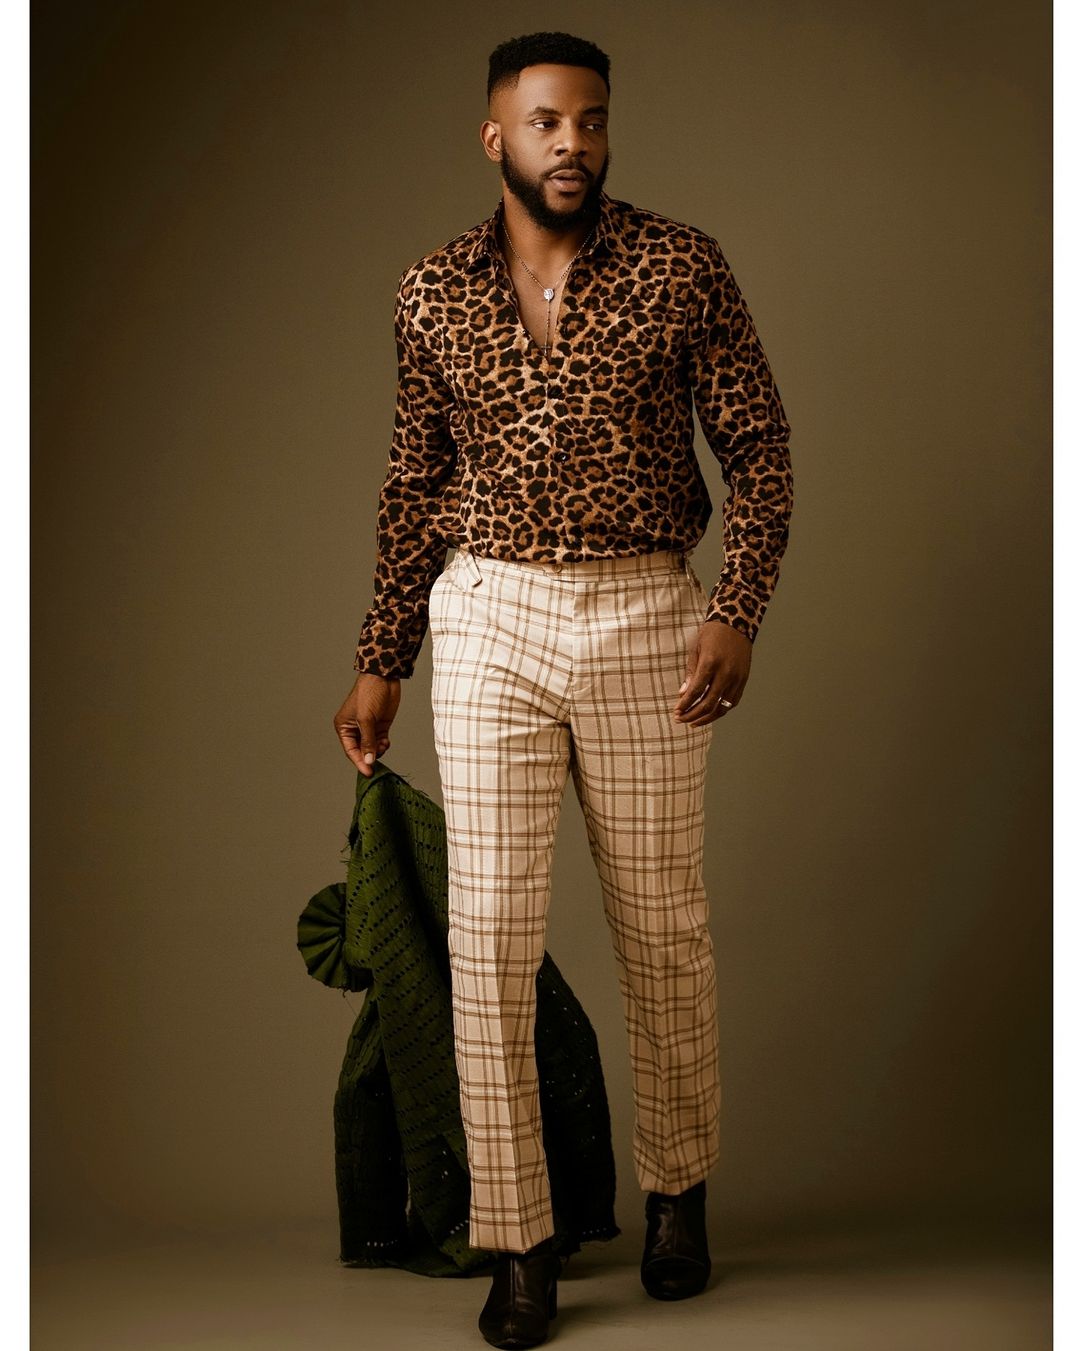 best-dressed-stylish-pan-african-male-celebrities-style-rave